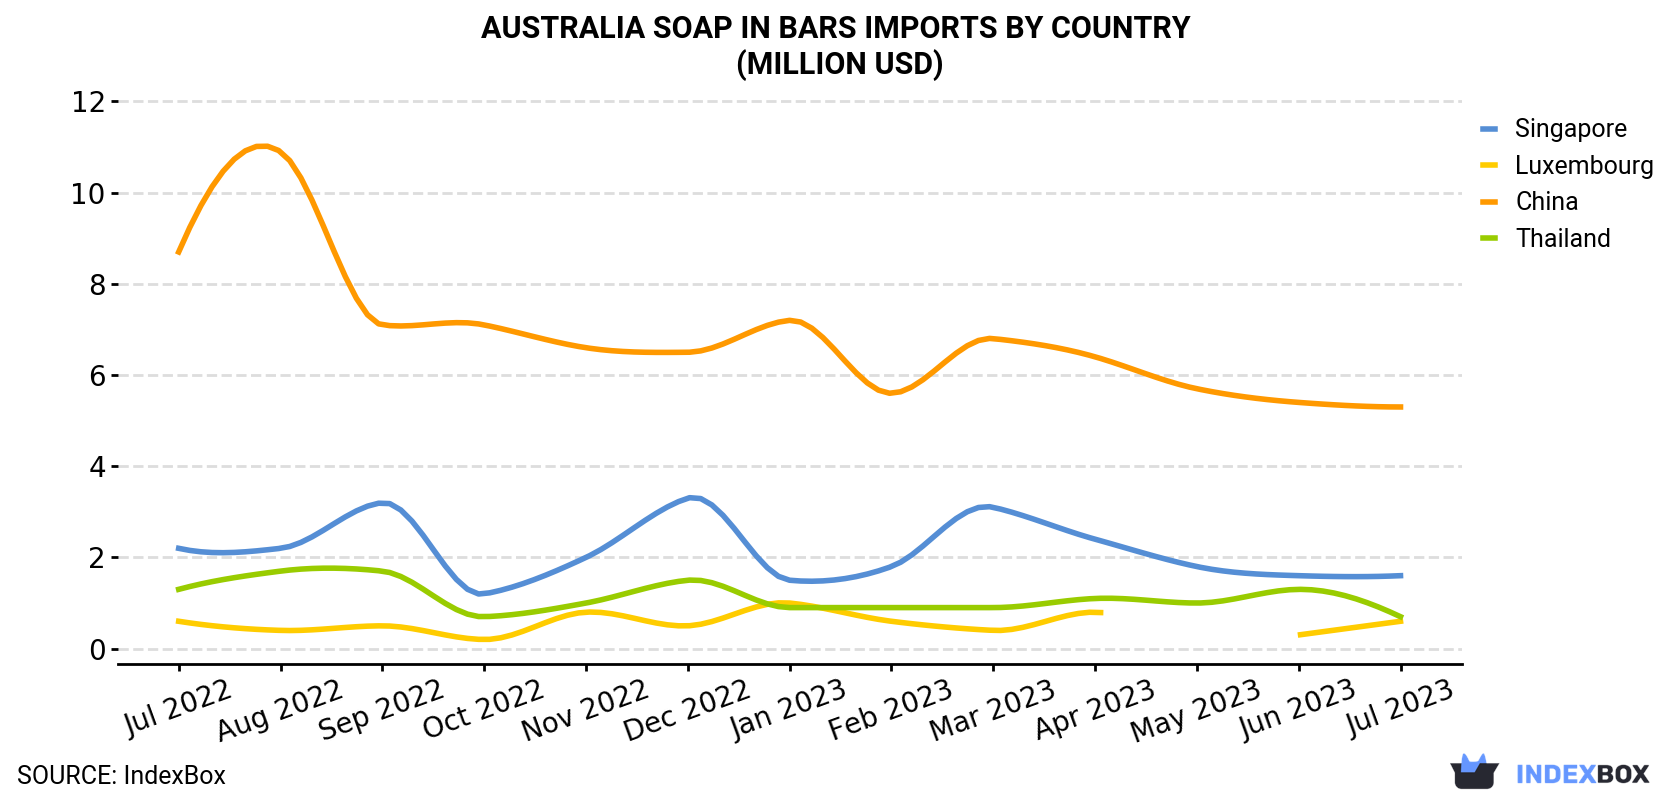 Australia Soap In Bars Imports By Country (Million USD)